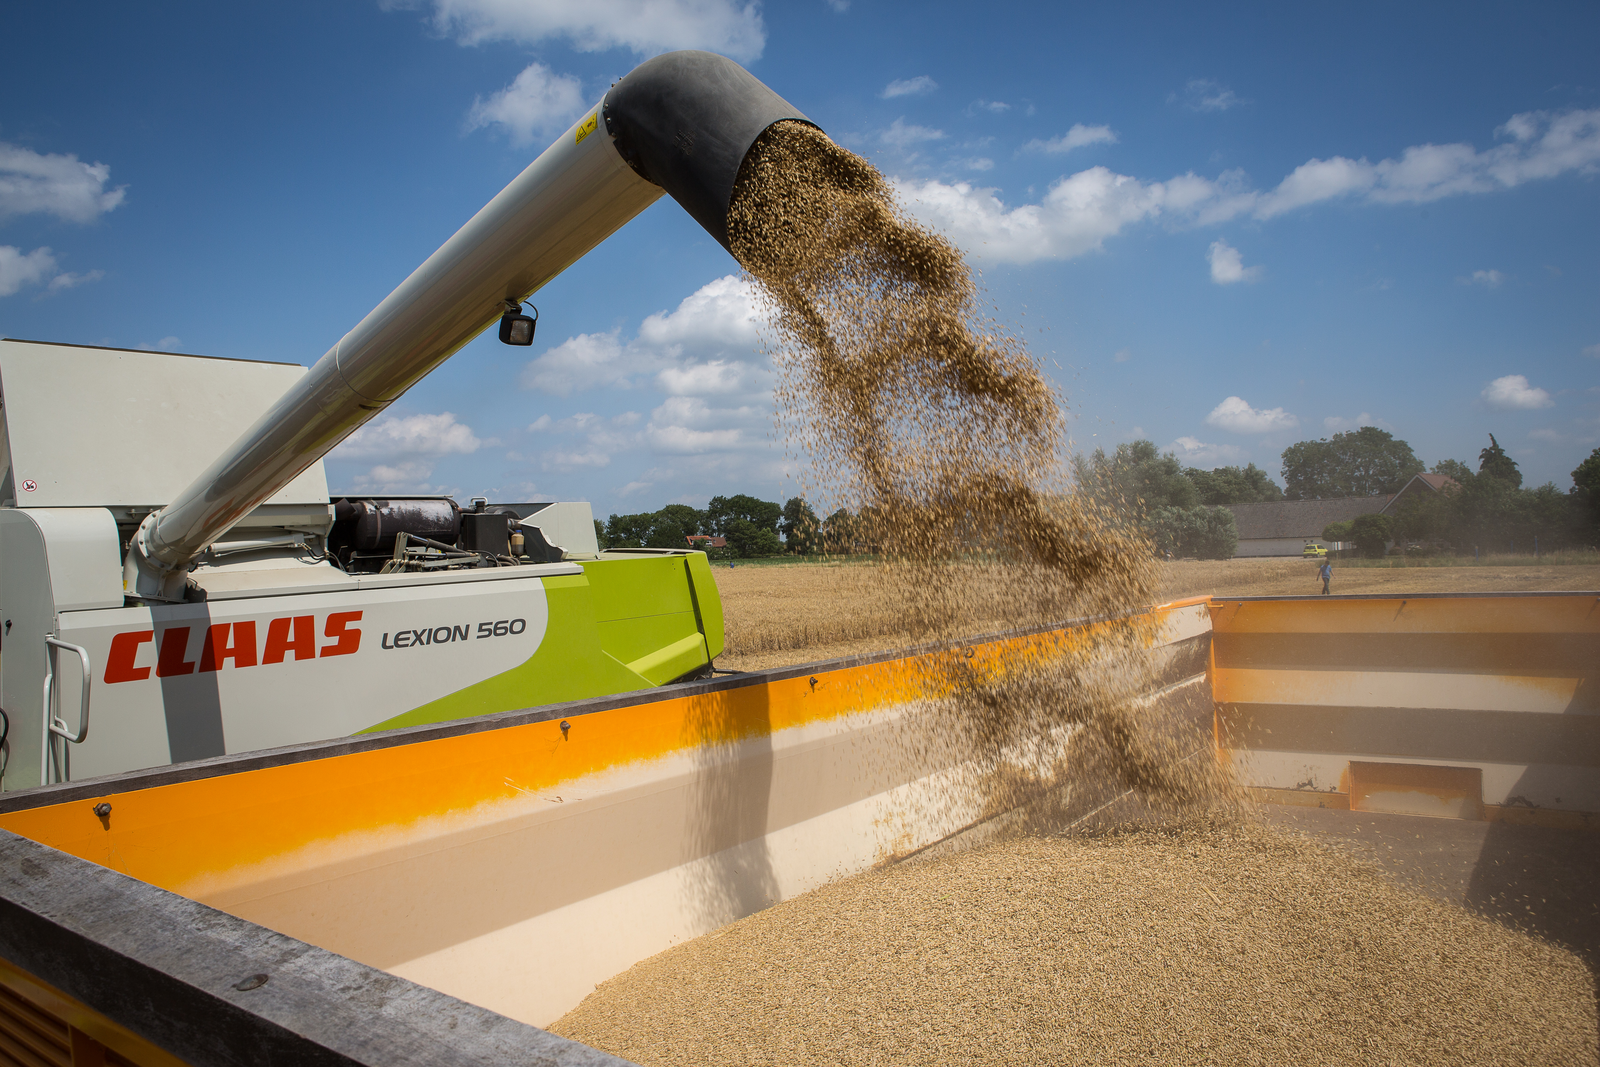 Record EU harvest: more grains used for feed